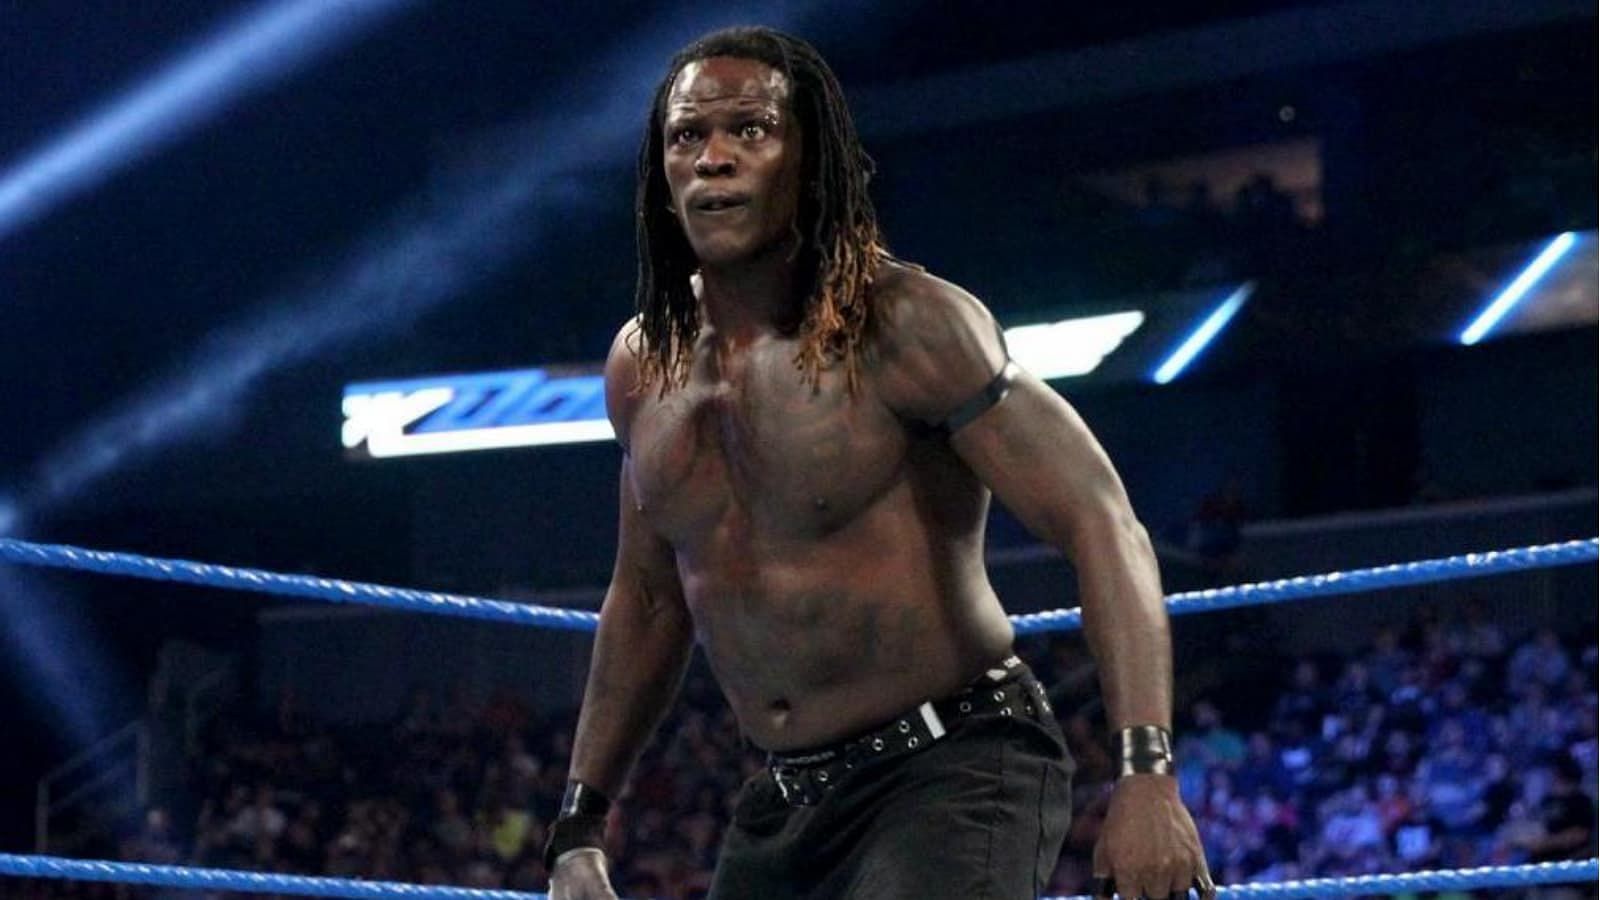 R-Truth once crossed paths with the Rated-R Superstar.